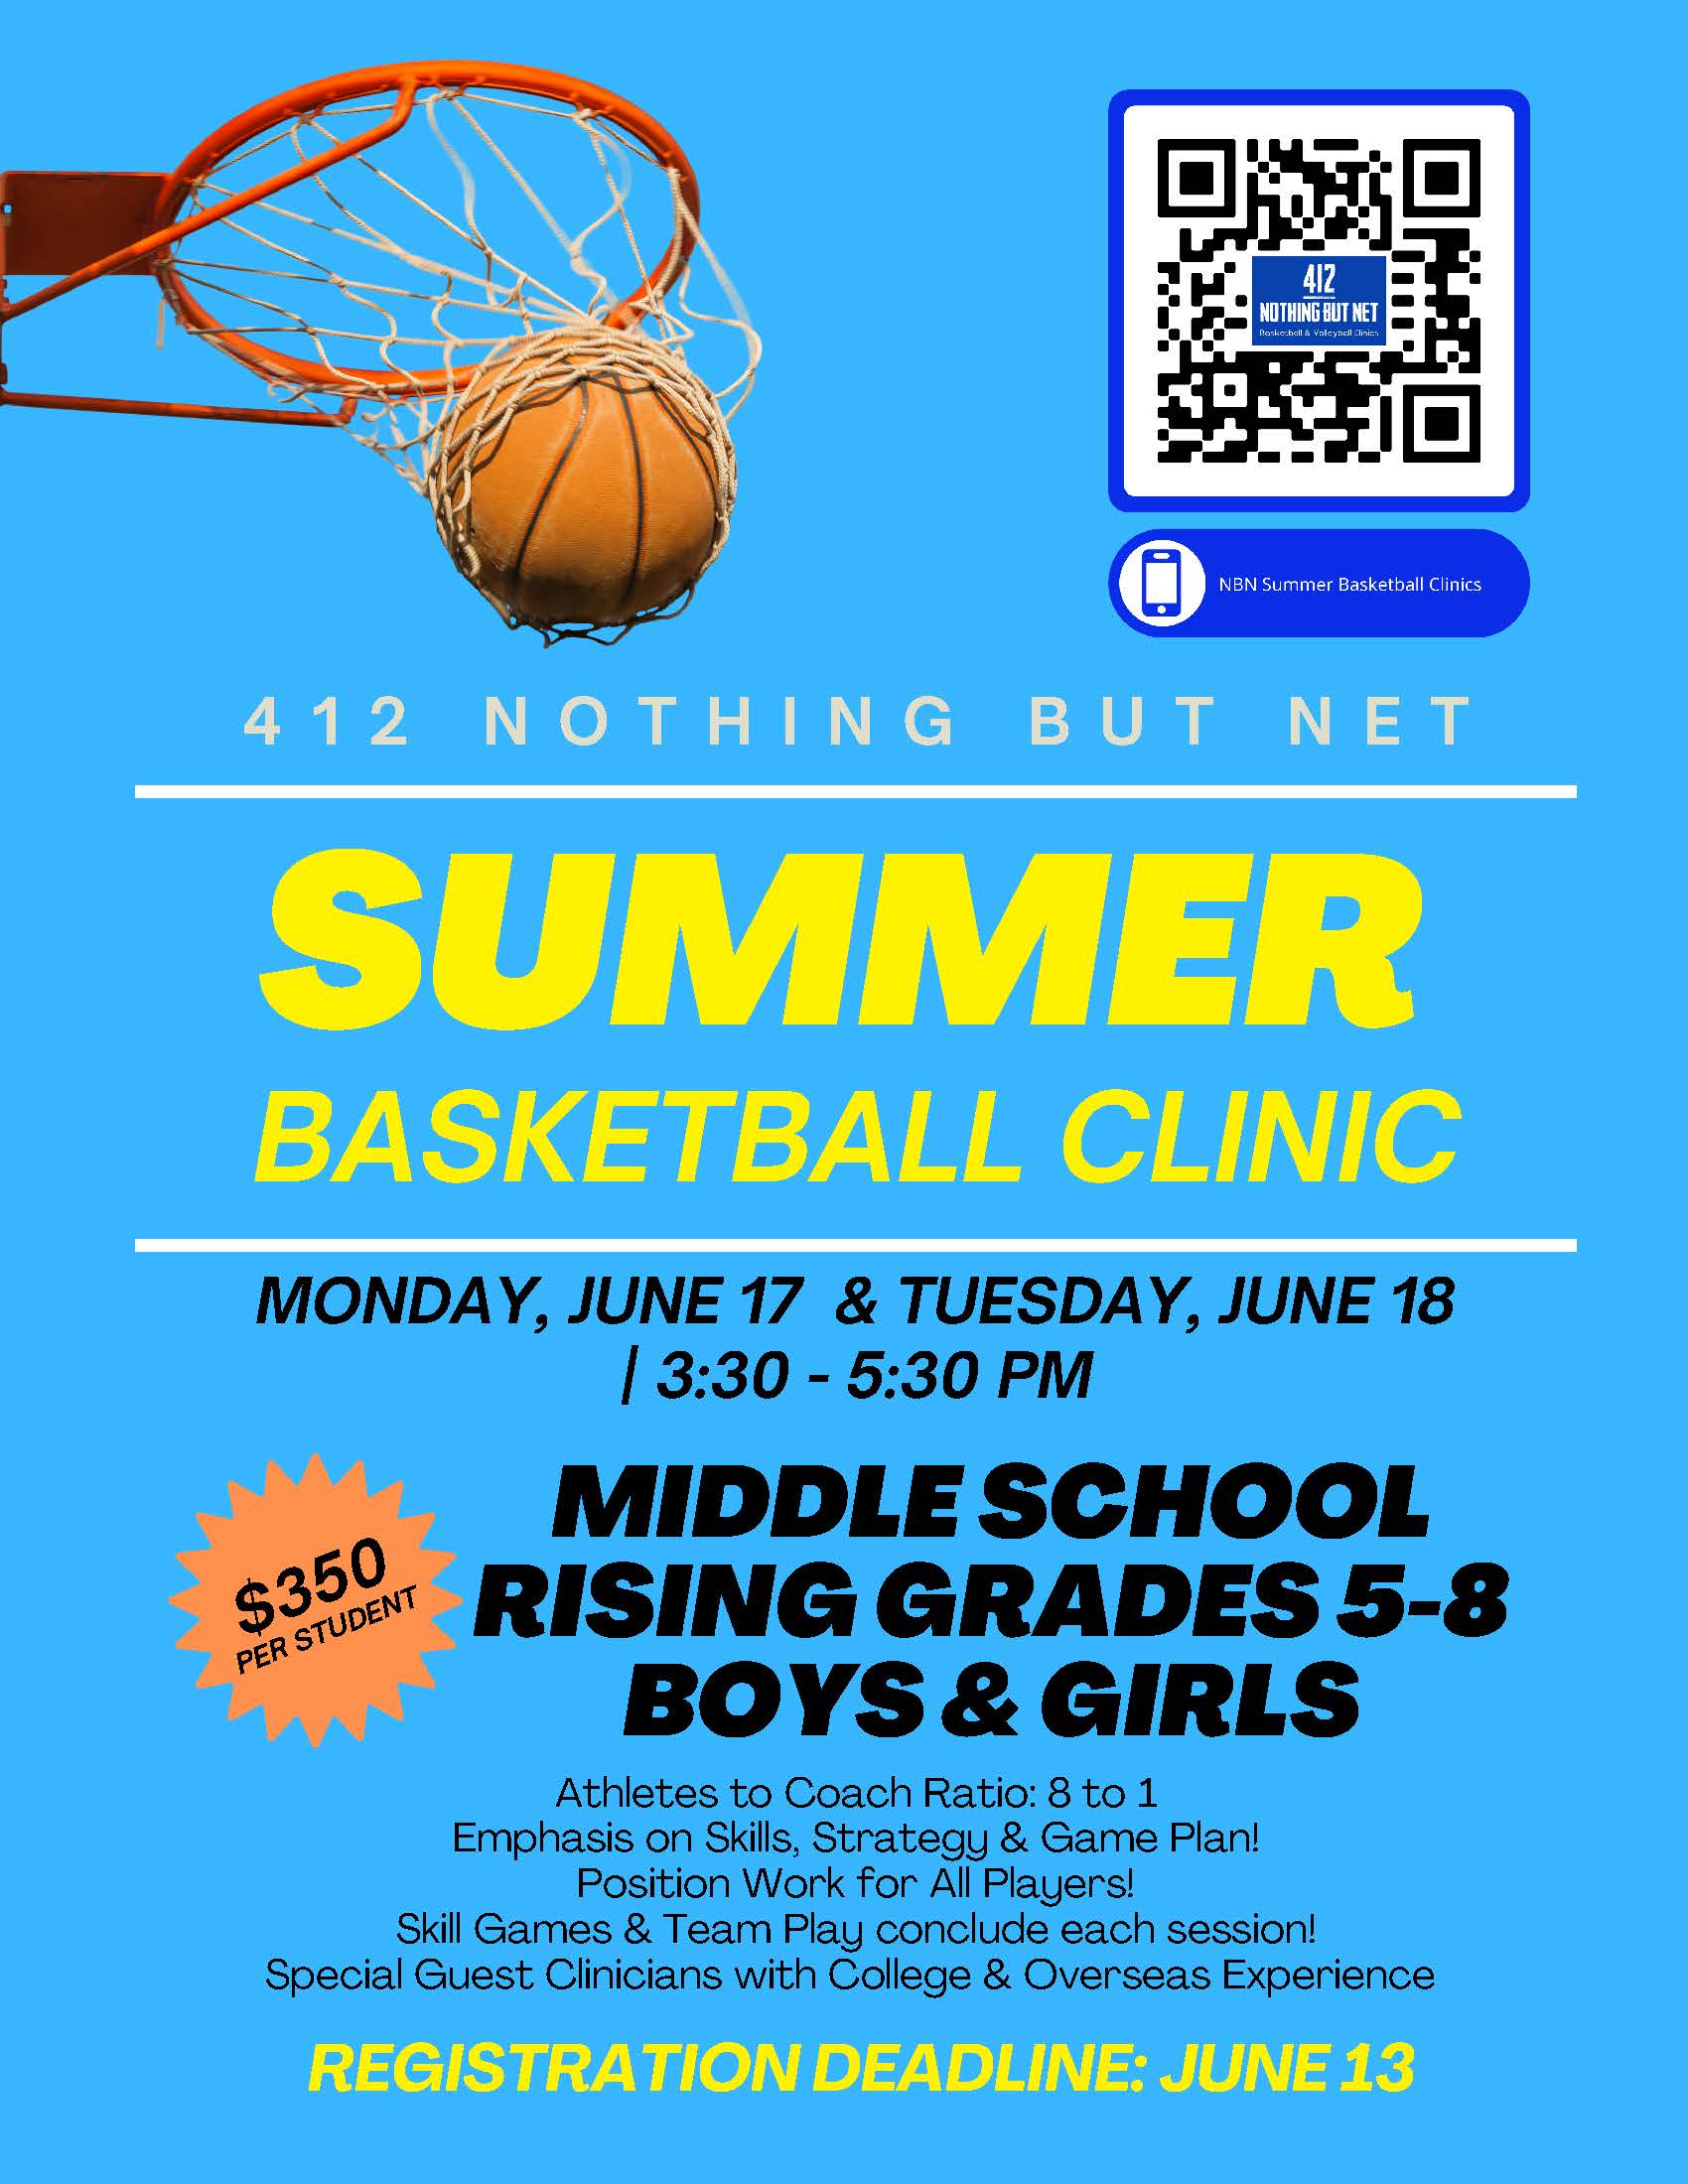 Nothing But Net Summer Basketball Clinic at 412